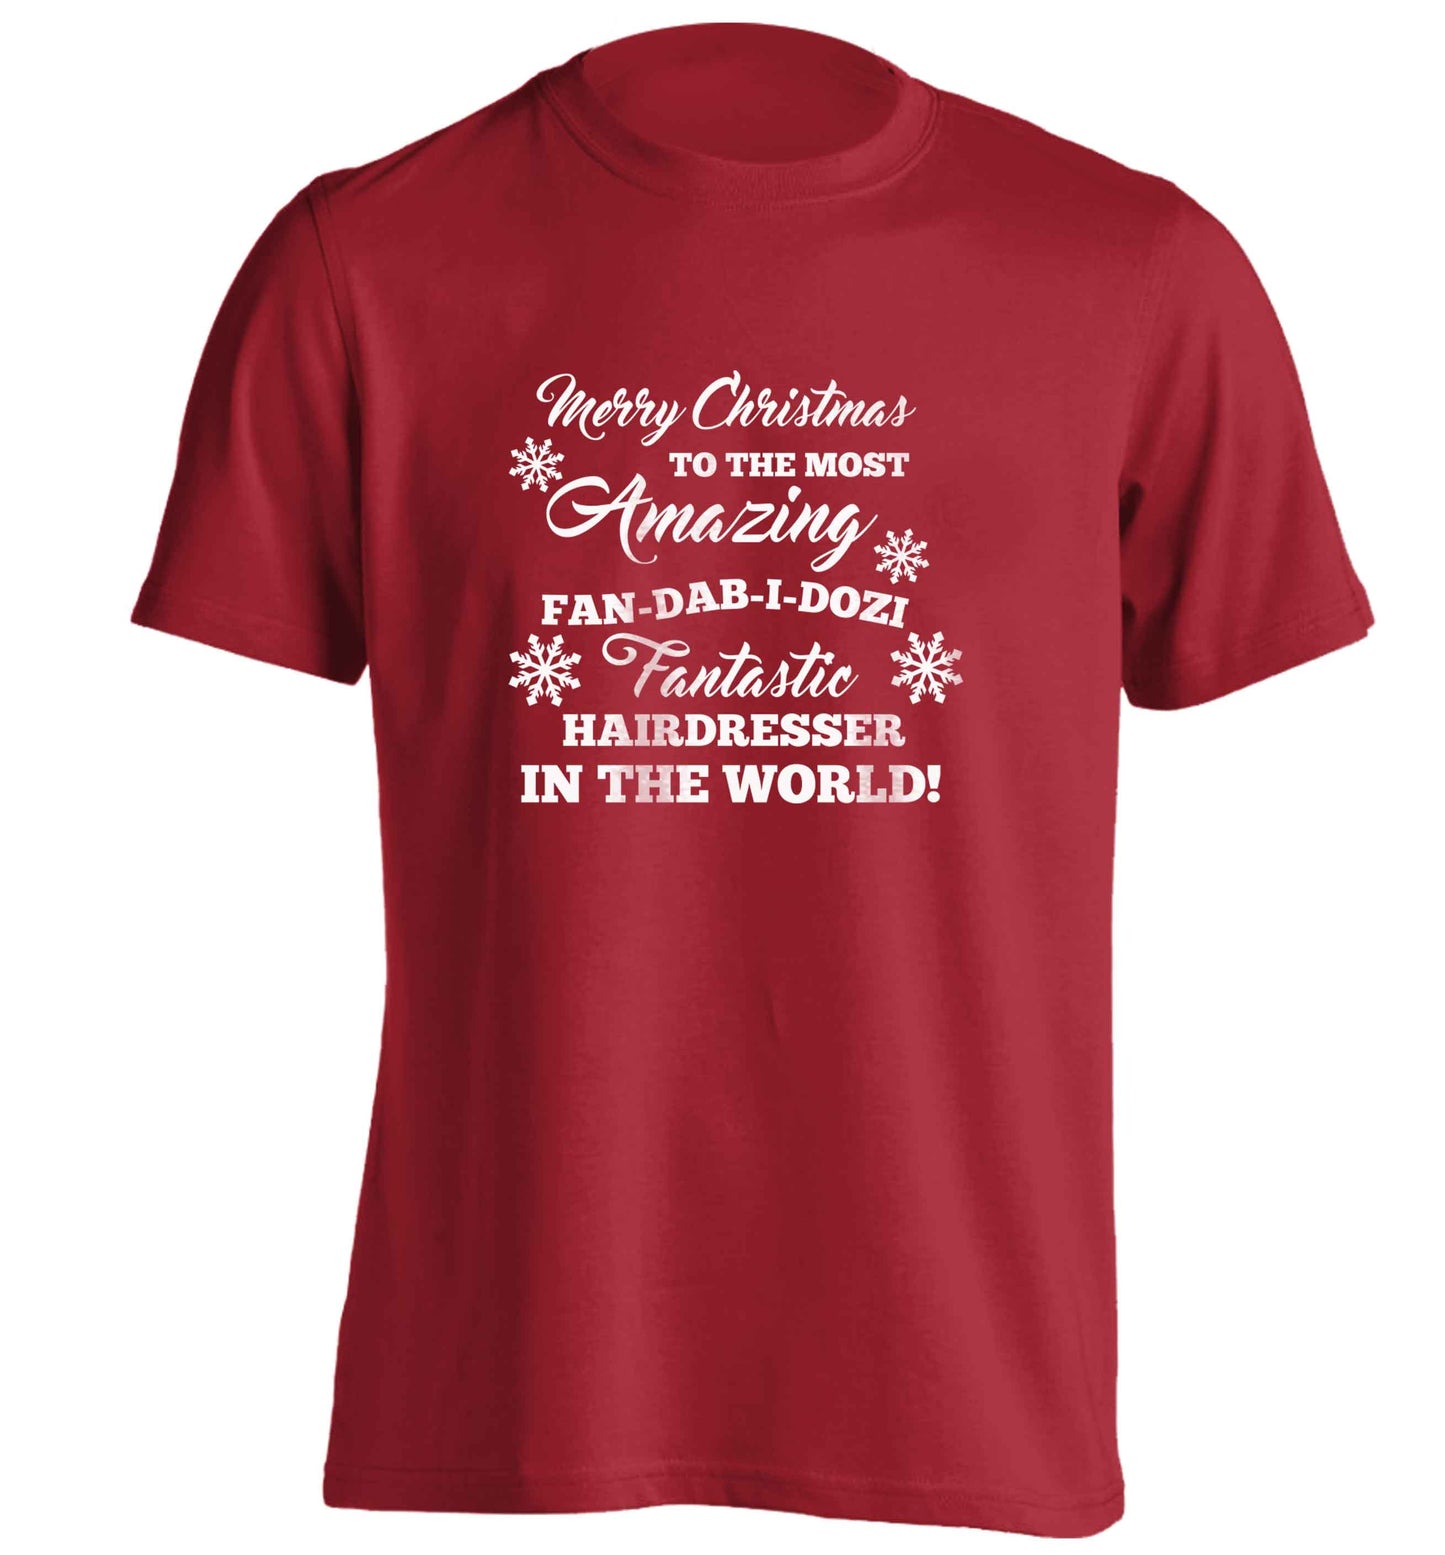 Merry Christmas to the most amazing dental assistant in the world! adults unisex red Tshirt 2XL